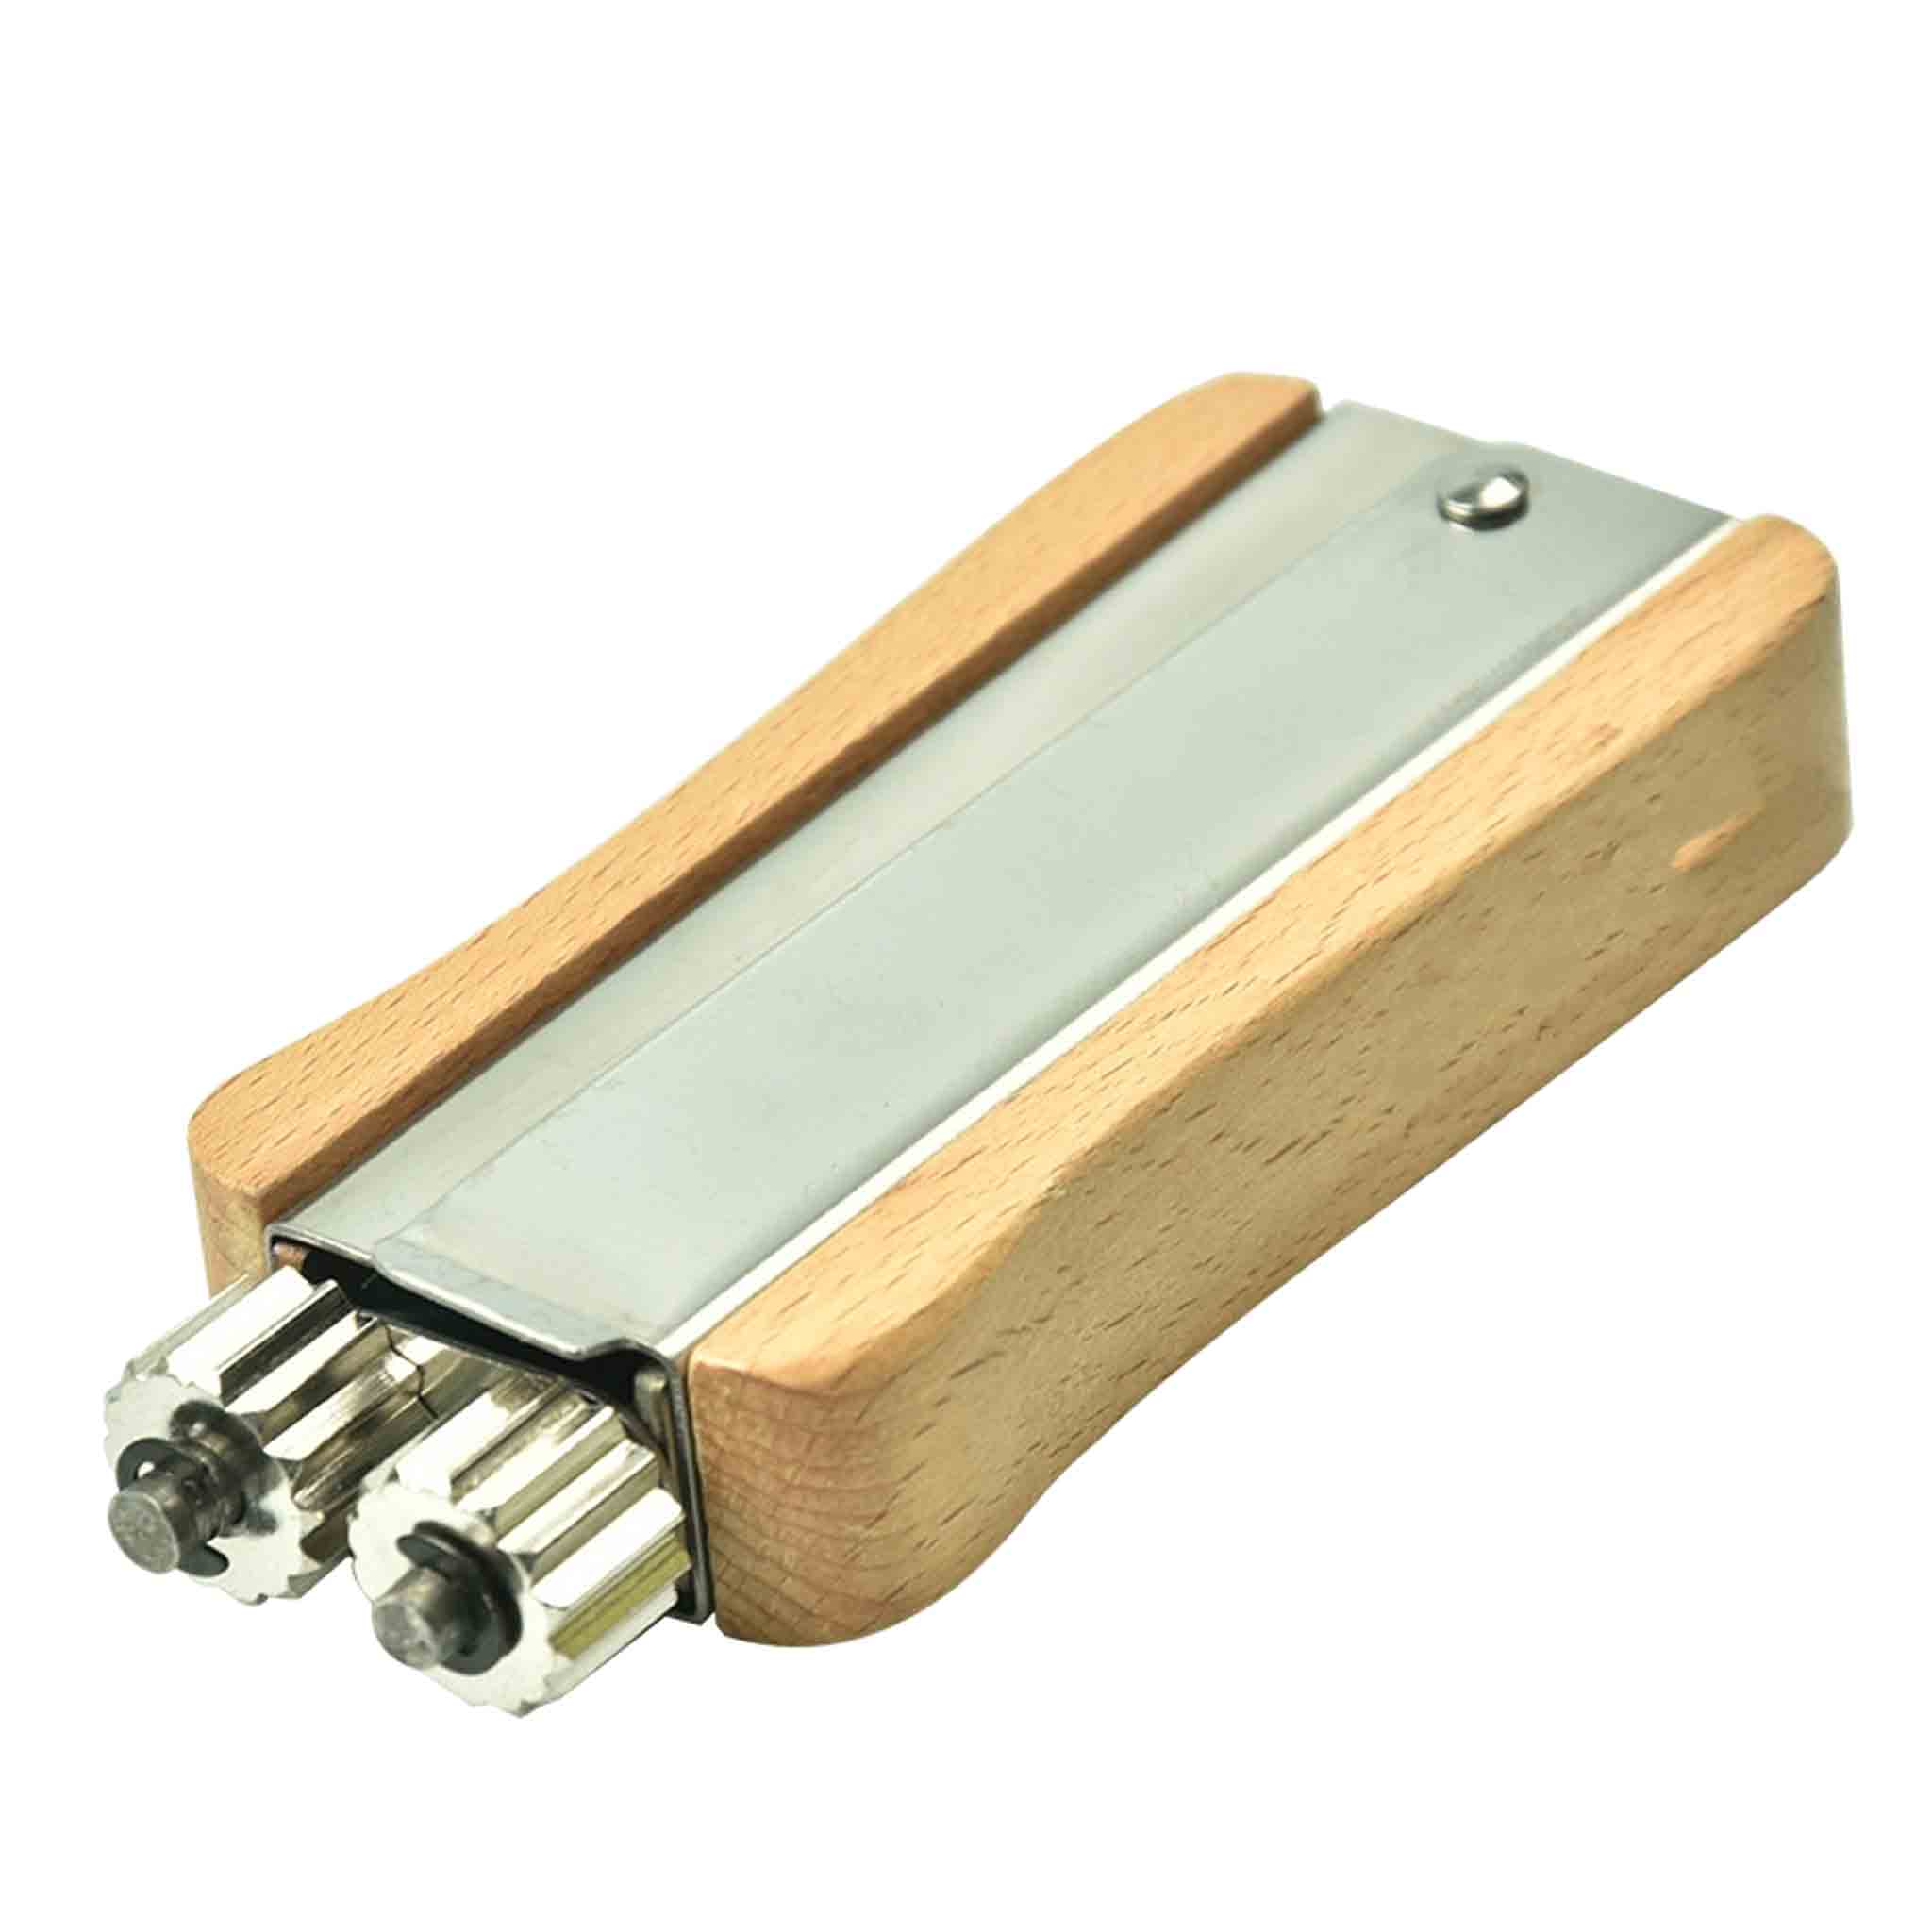 Wire Crimper Bee Frame Tensioner with Wooden Handle - Tools collection by Buzzbee Beekeeping Supplies